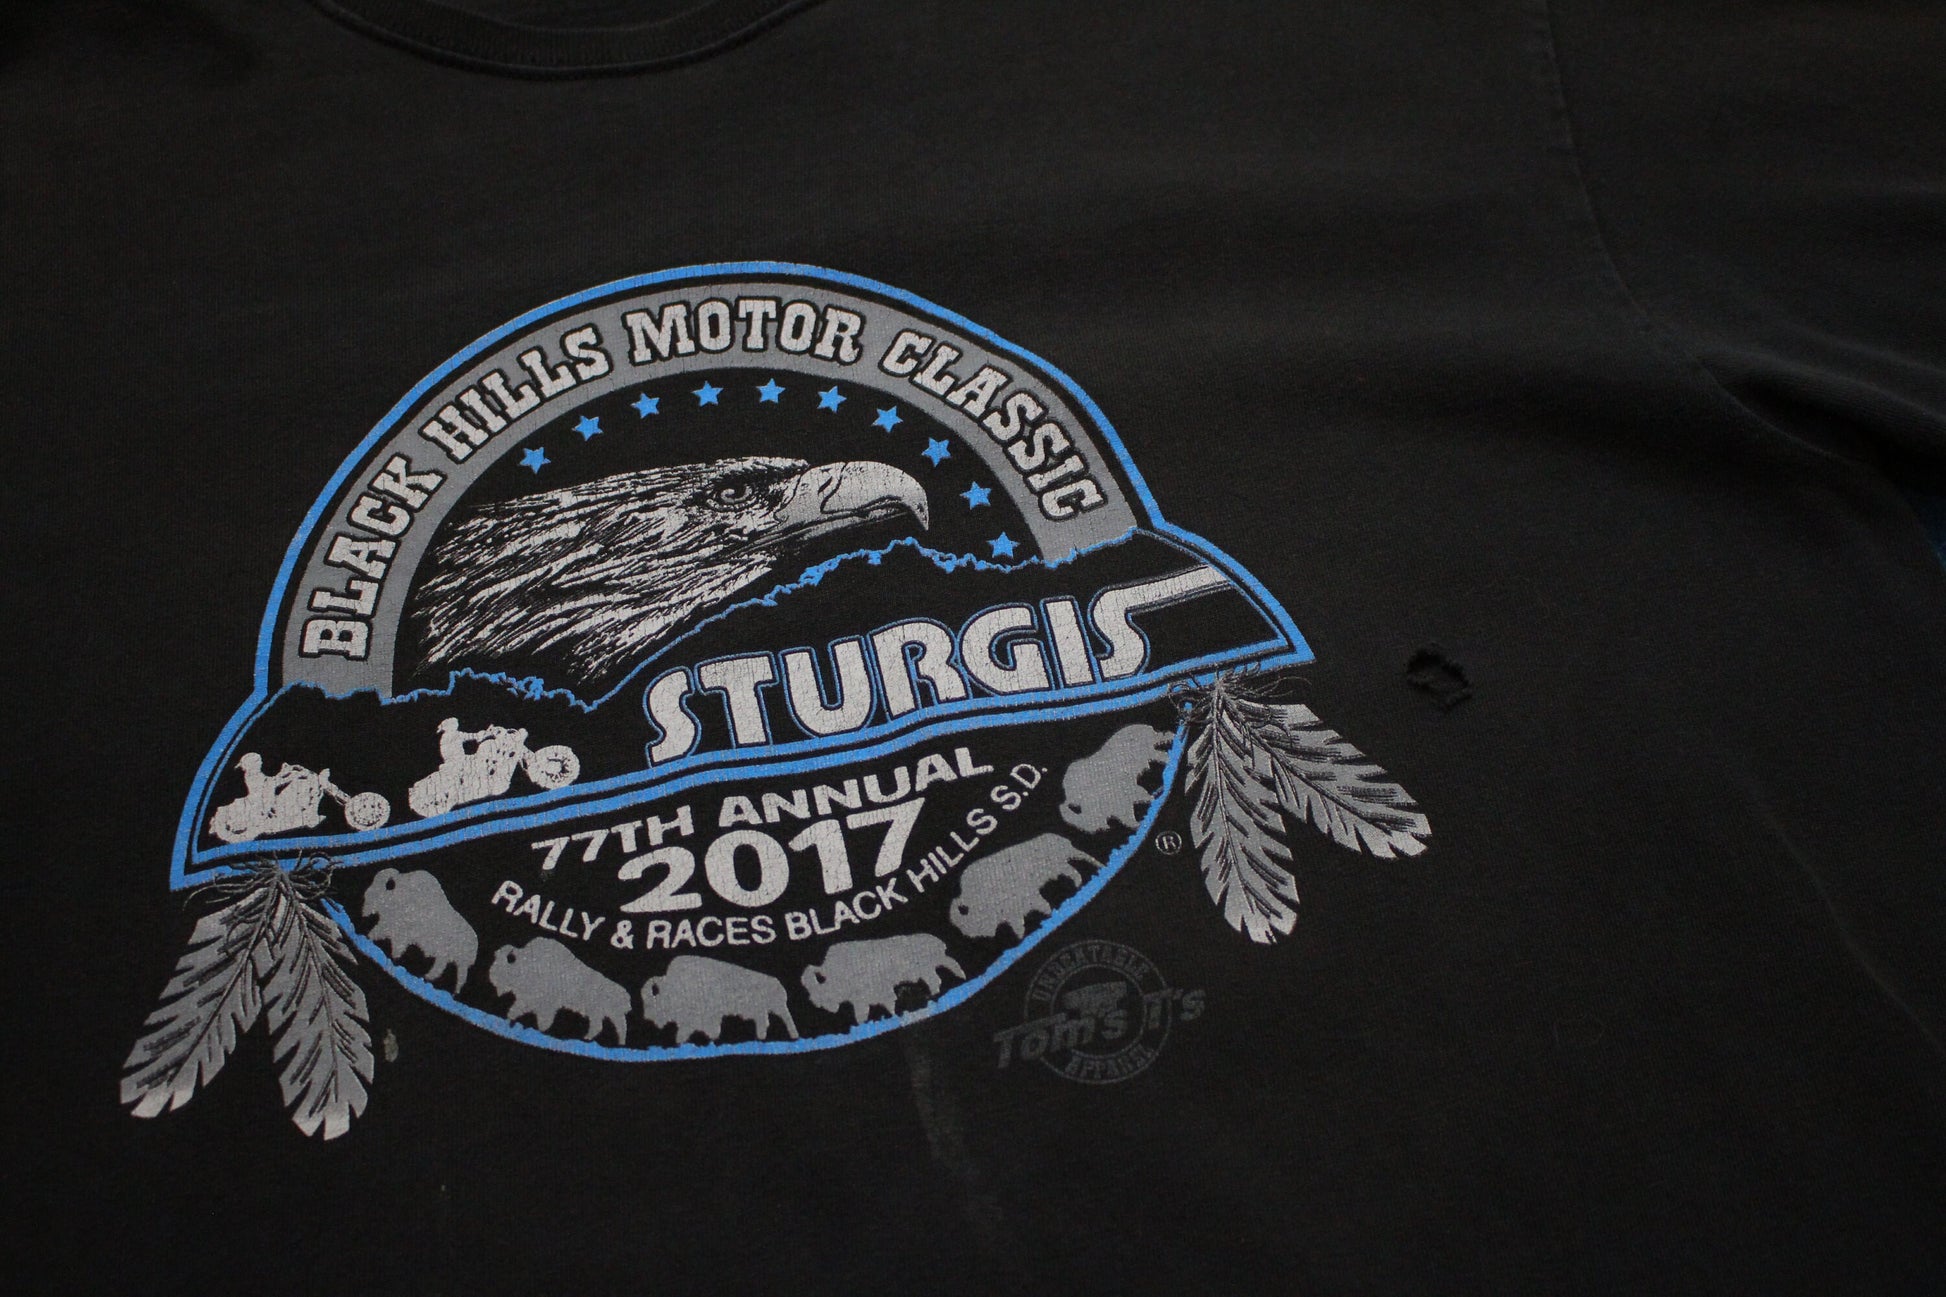 2010s 2017 Sturgis Motorcycle Rally T-Shirt Size L